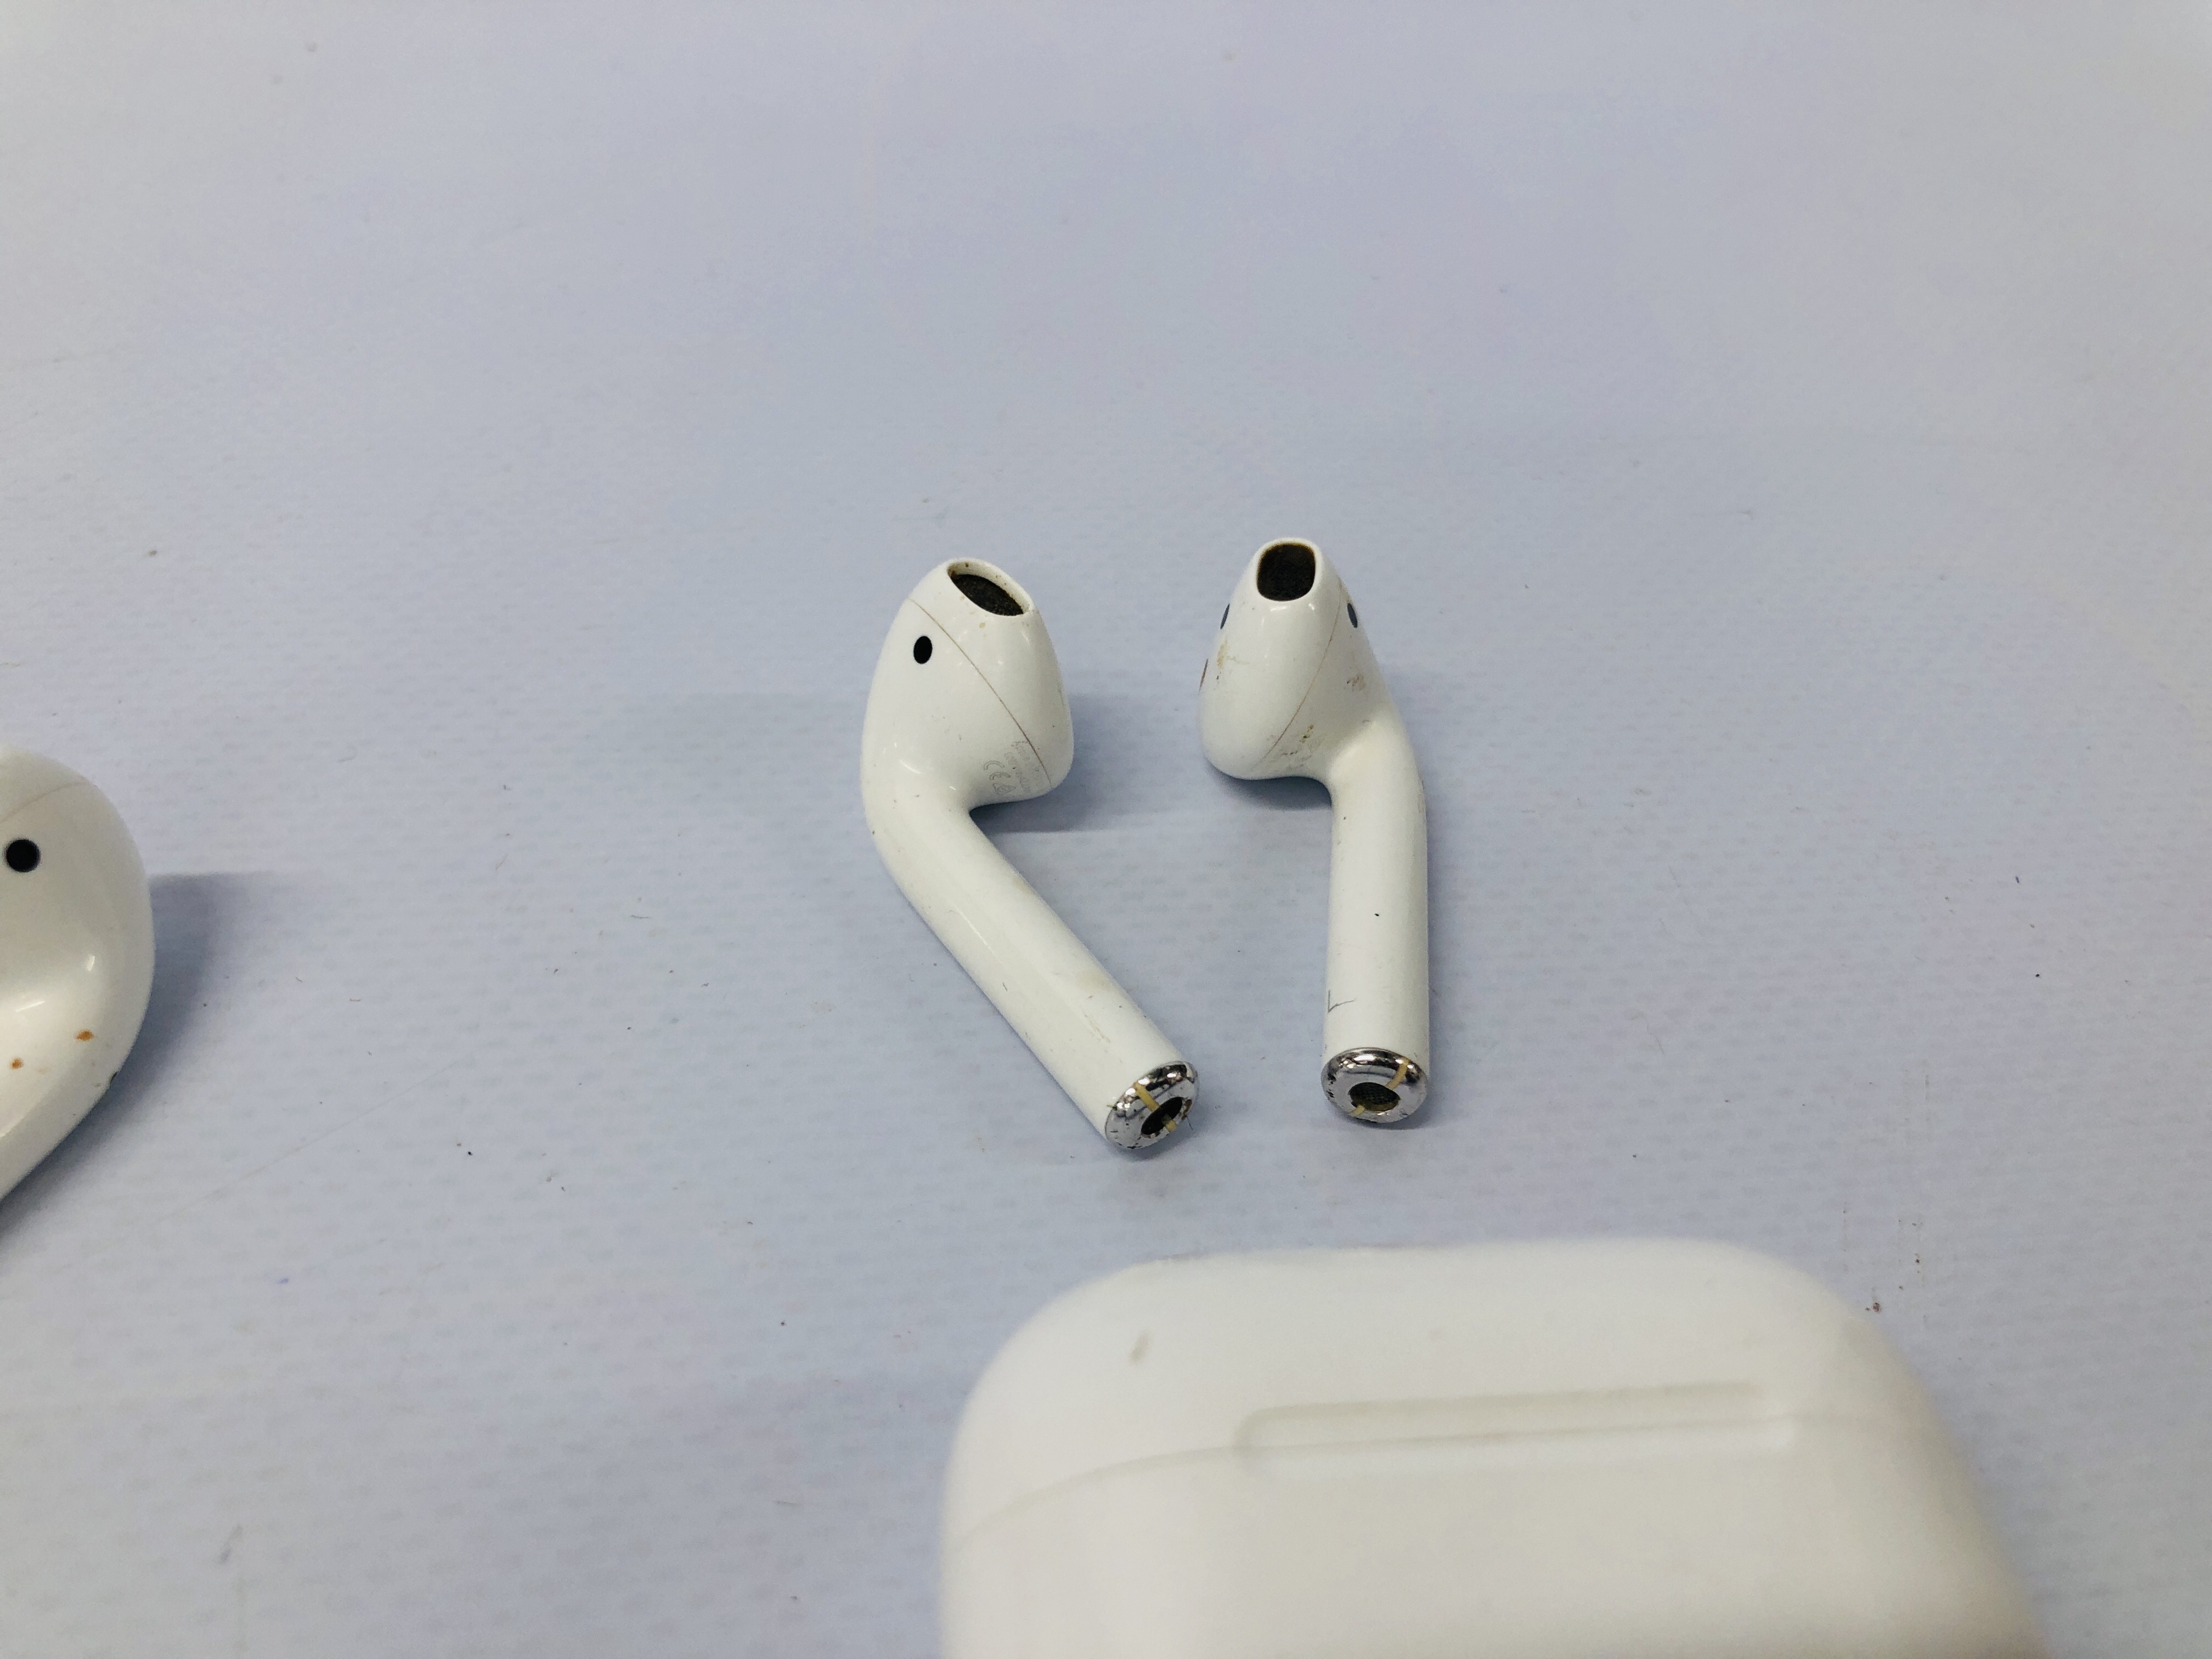 TWO PAIRS OF APPLE EAR PODS WITH CHARGING CASES - NO GUARANTEE OF CONNECTIVITY. SOLD AS SEEN. - Image 3 of 3